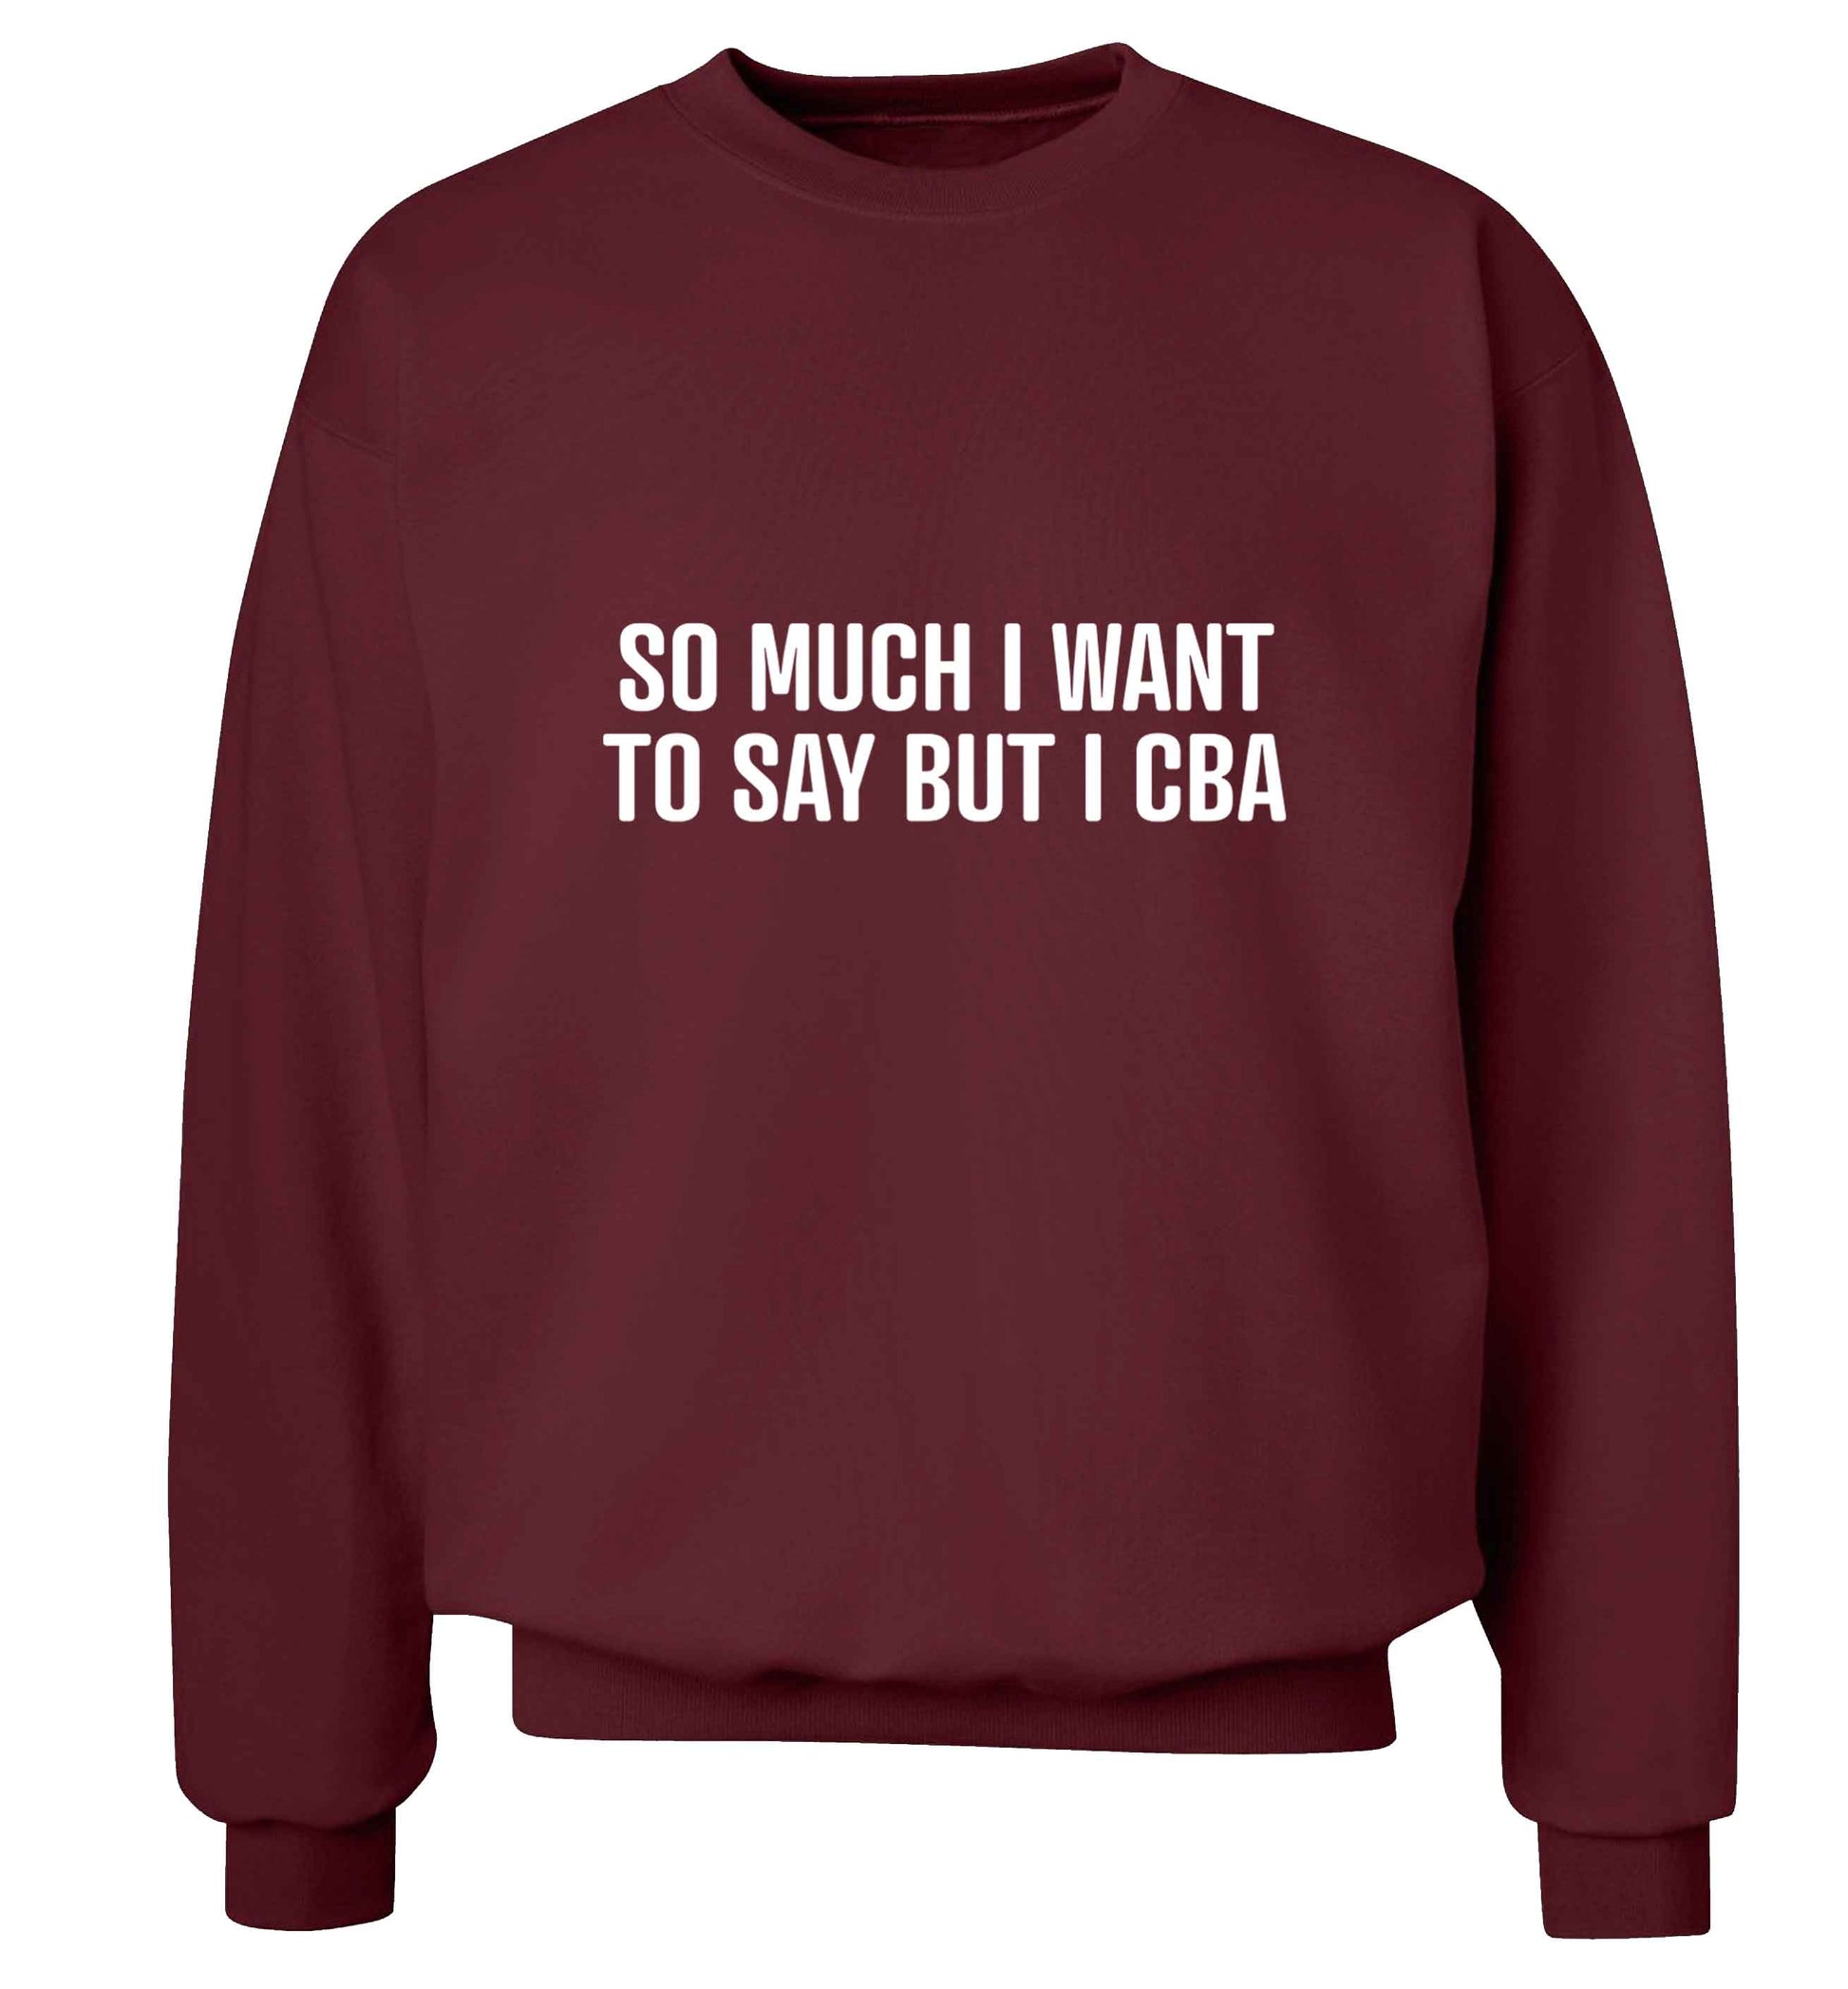 So much I want to say I cba  adult's unisex maroon sweater 2XL